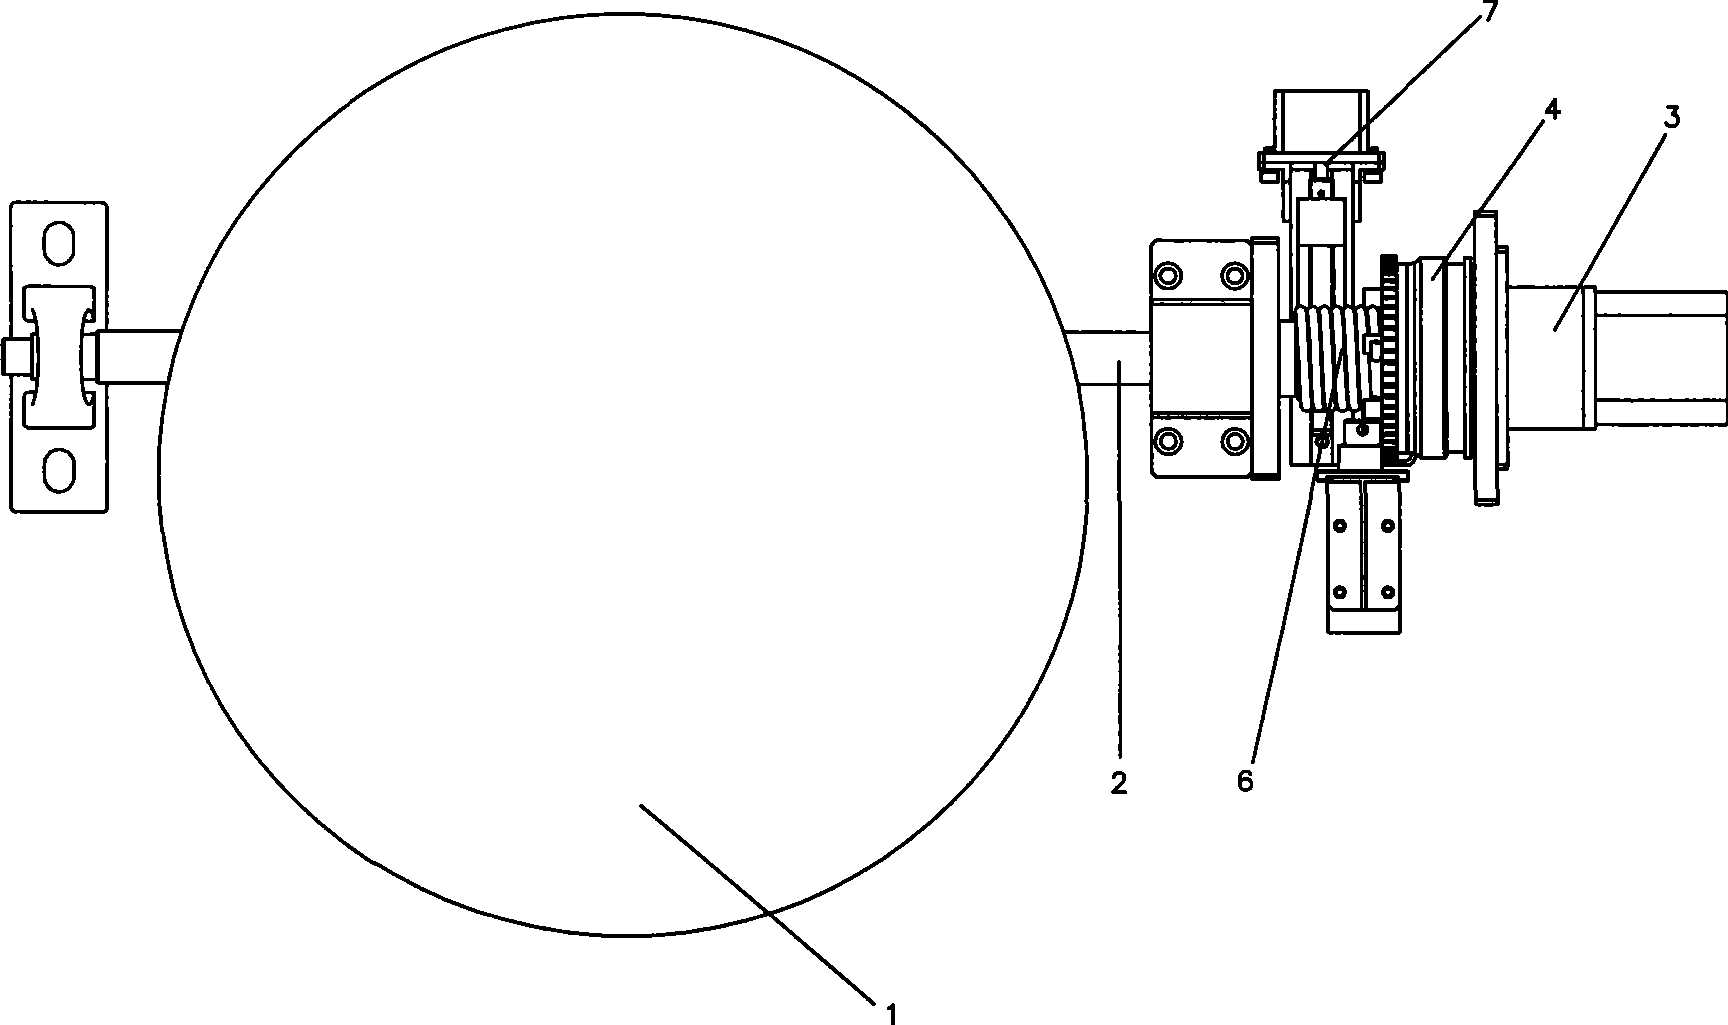 Device for turning pan and automatic/semiautomatic cooking device